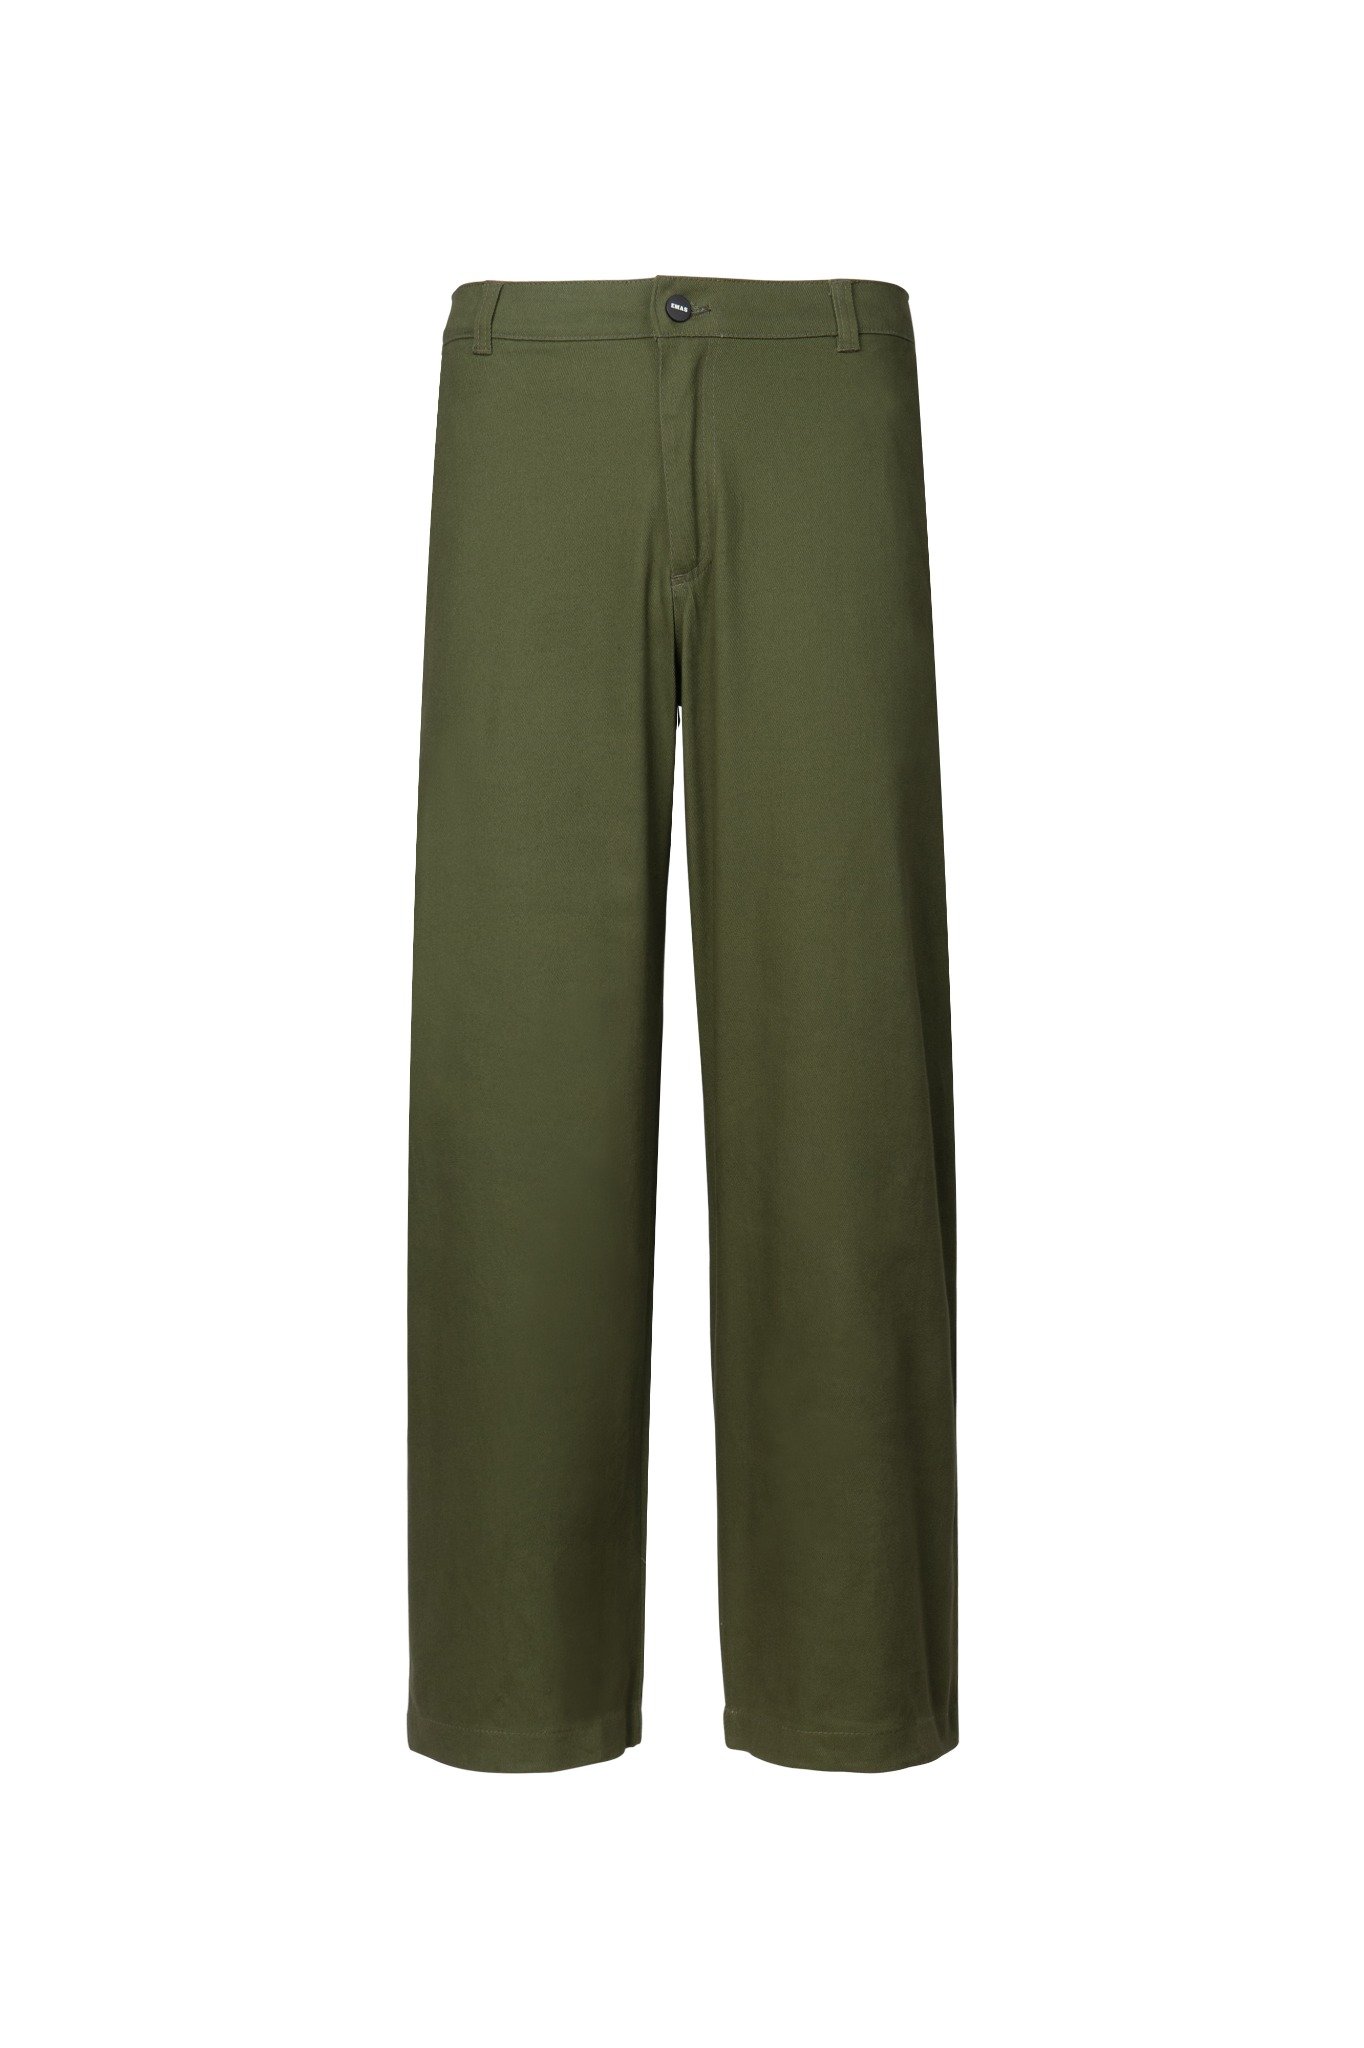  DARKGREEN RELAXED FIT CHINO PANTS 